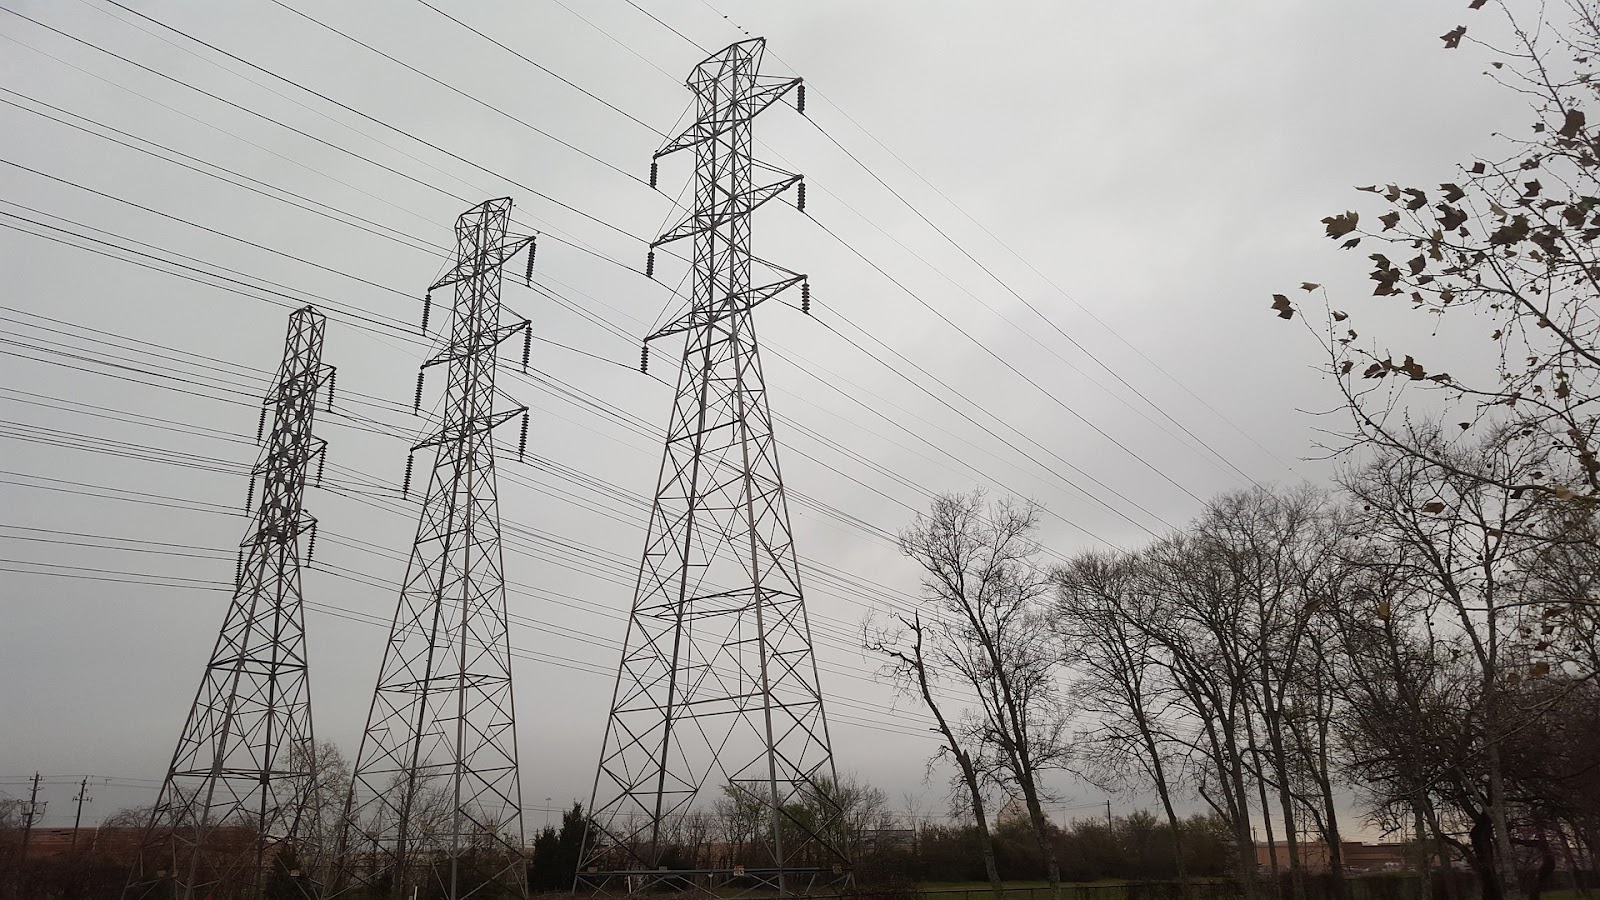 More severe weather threatens the power grid.